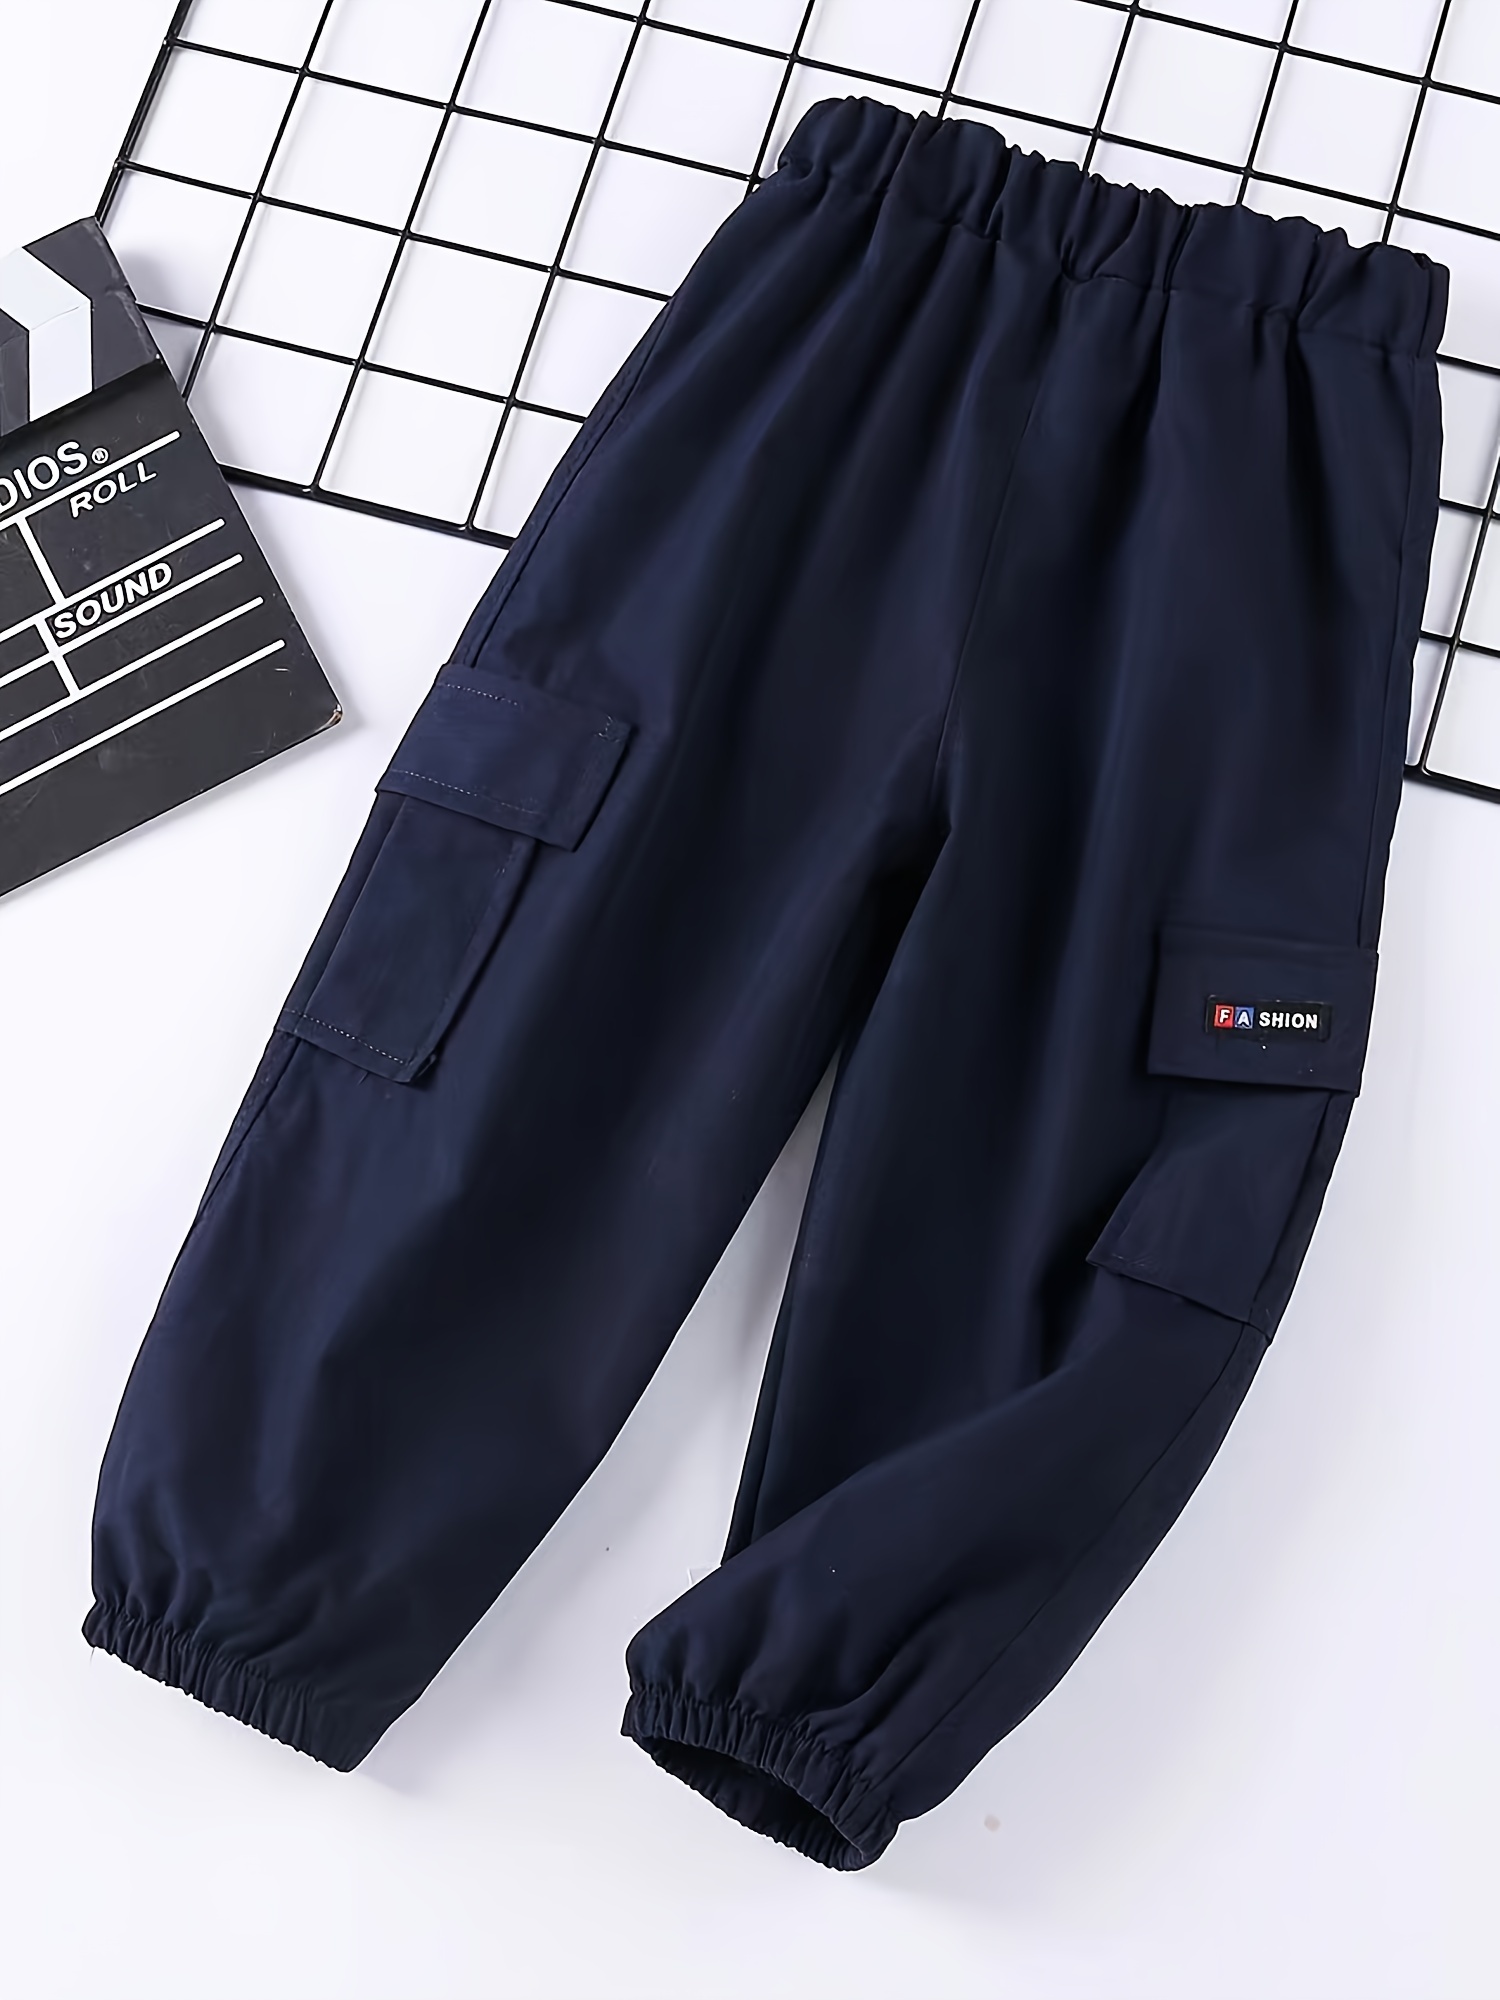 Korean Letter Sport Cotton Cargo Trousers For Baby Boys Summer Thin  Khaki/Black Cargo Pants For Casual Wear Sizes 4 15 210622 From Cong05,  $18.98